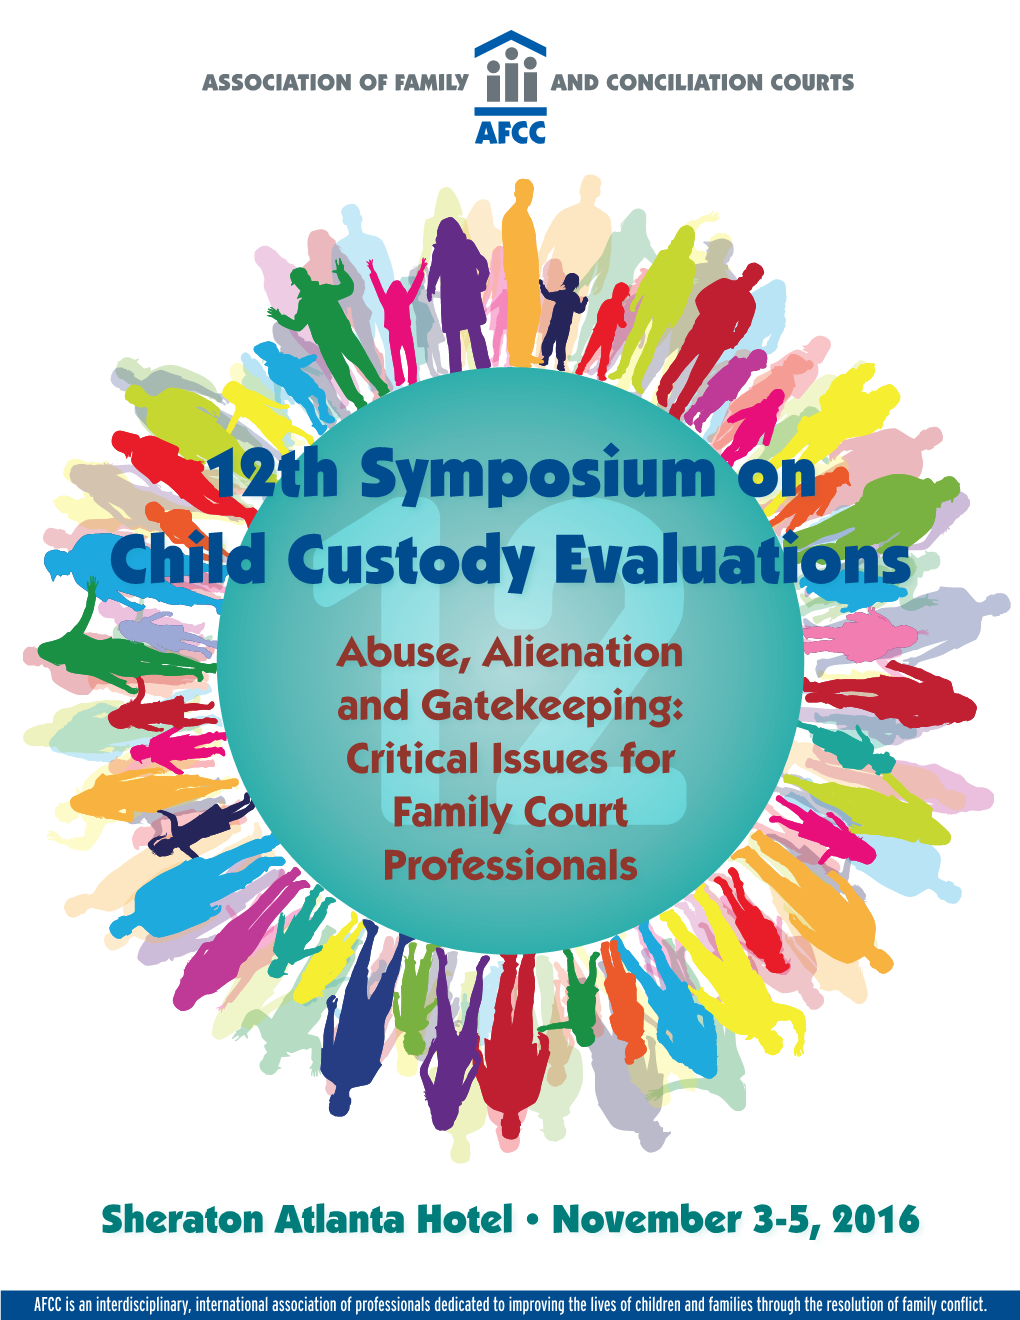 12Th Symposium on Child Custody Evaluations Abuse, Alienation and Gatekeeping: Critical Issues for Family Court Professionals